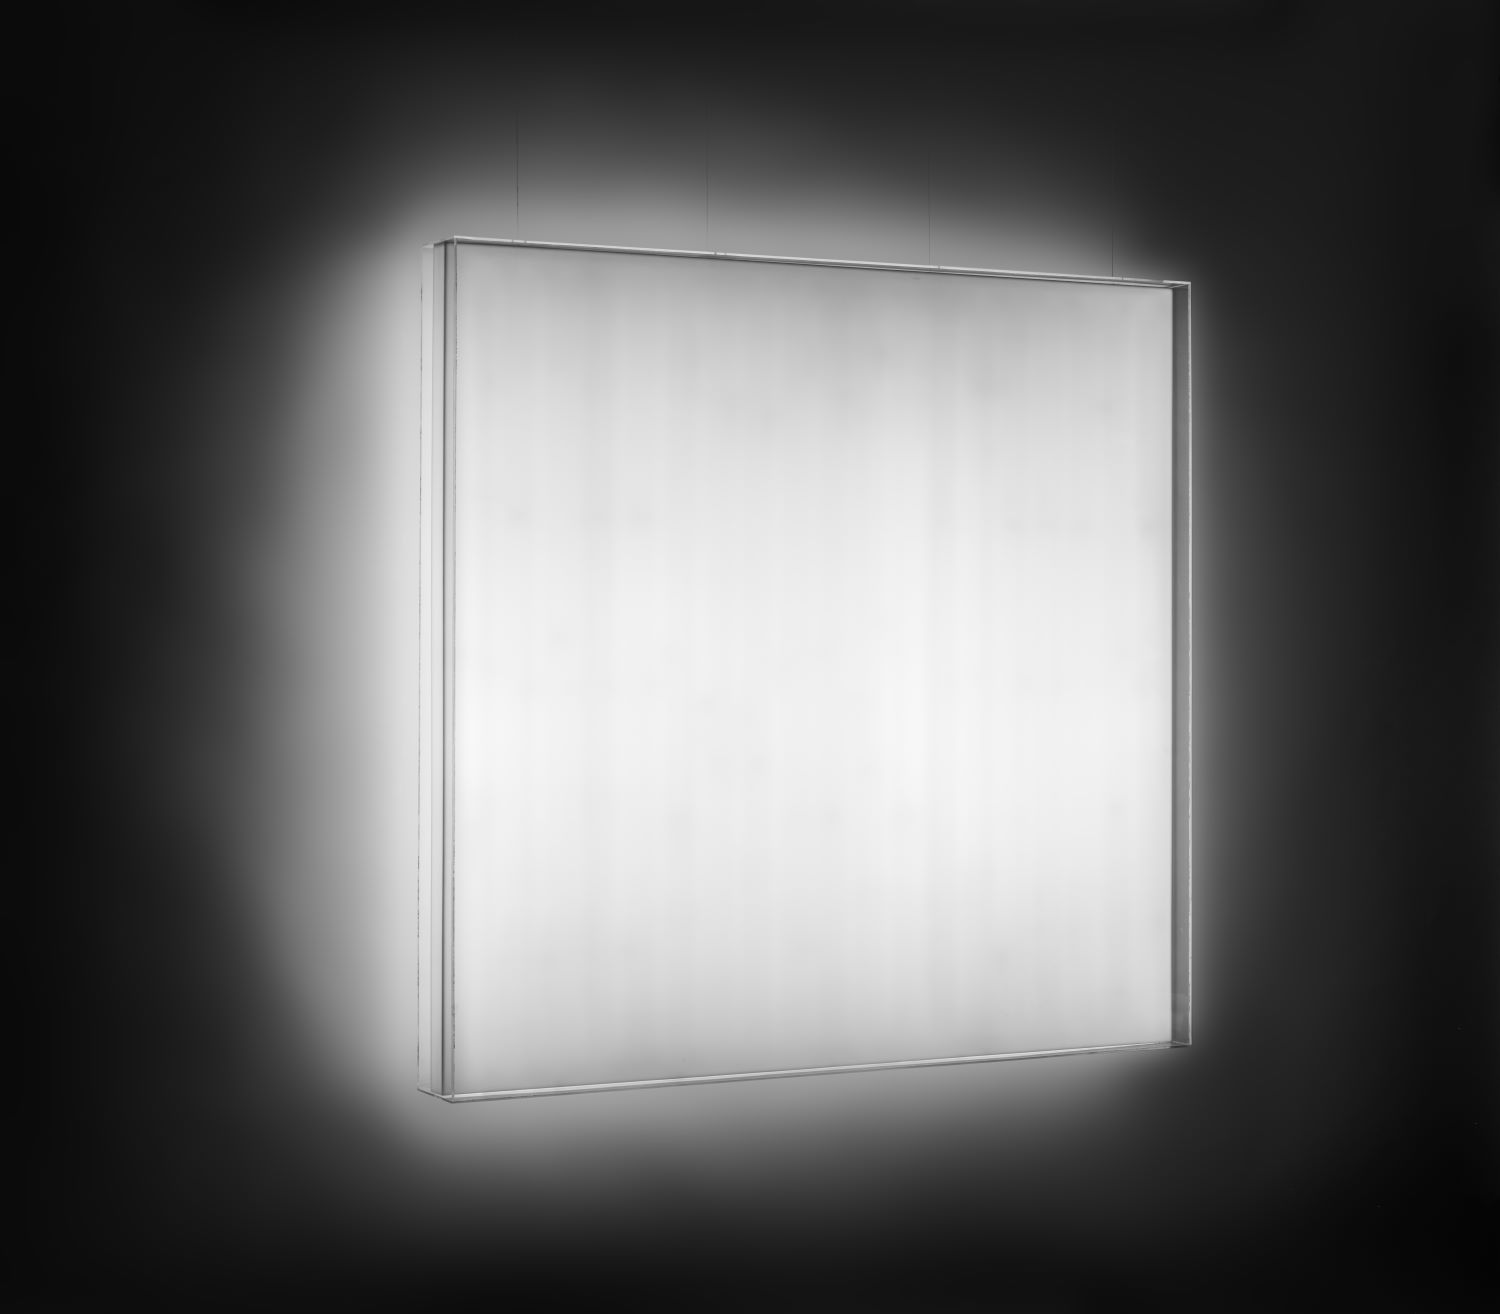 Glowing white square that appears to be hovering over a wall